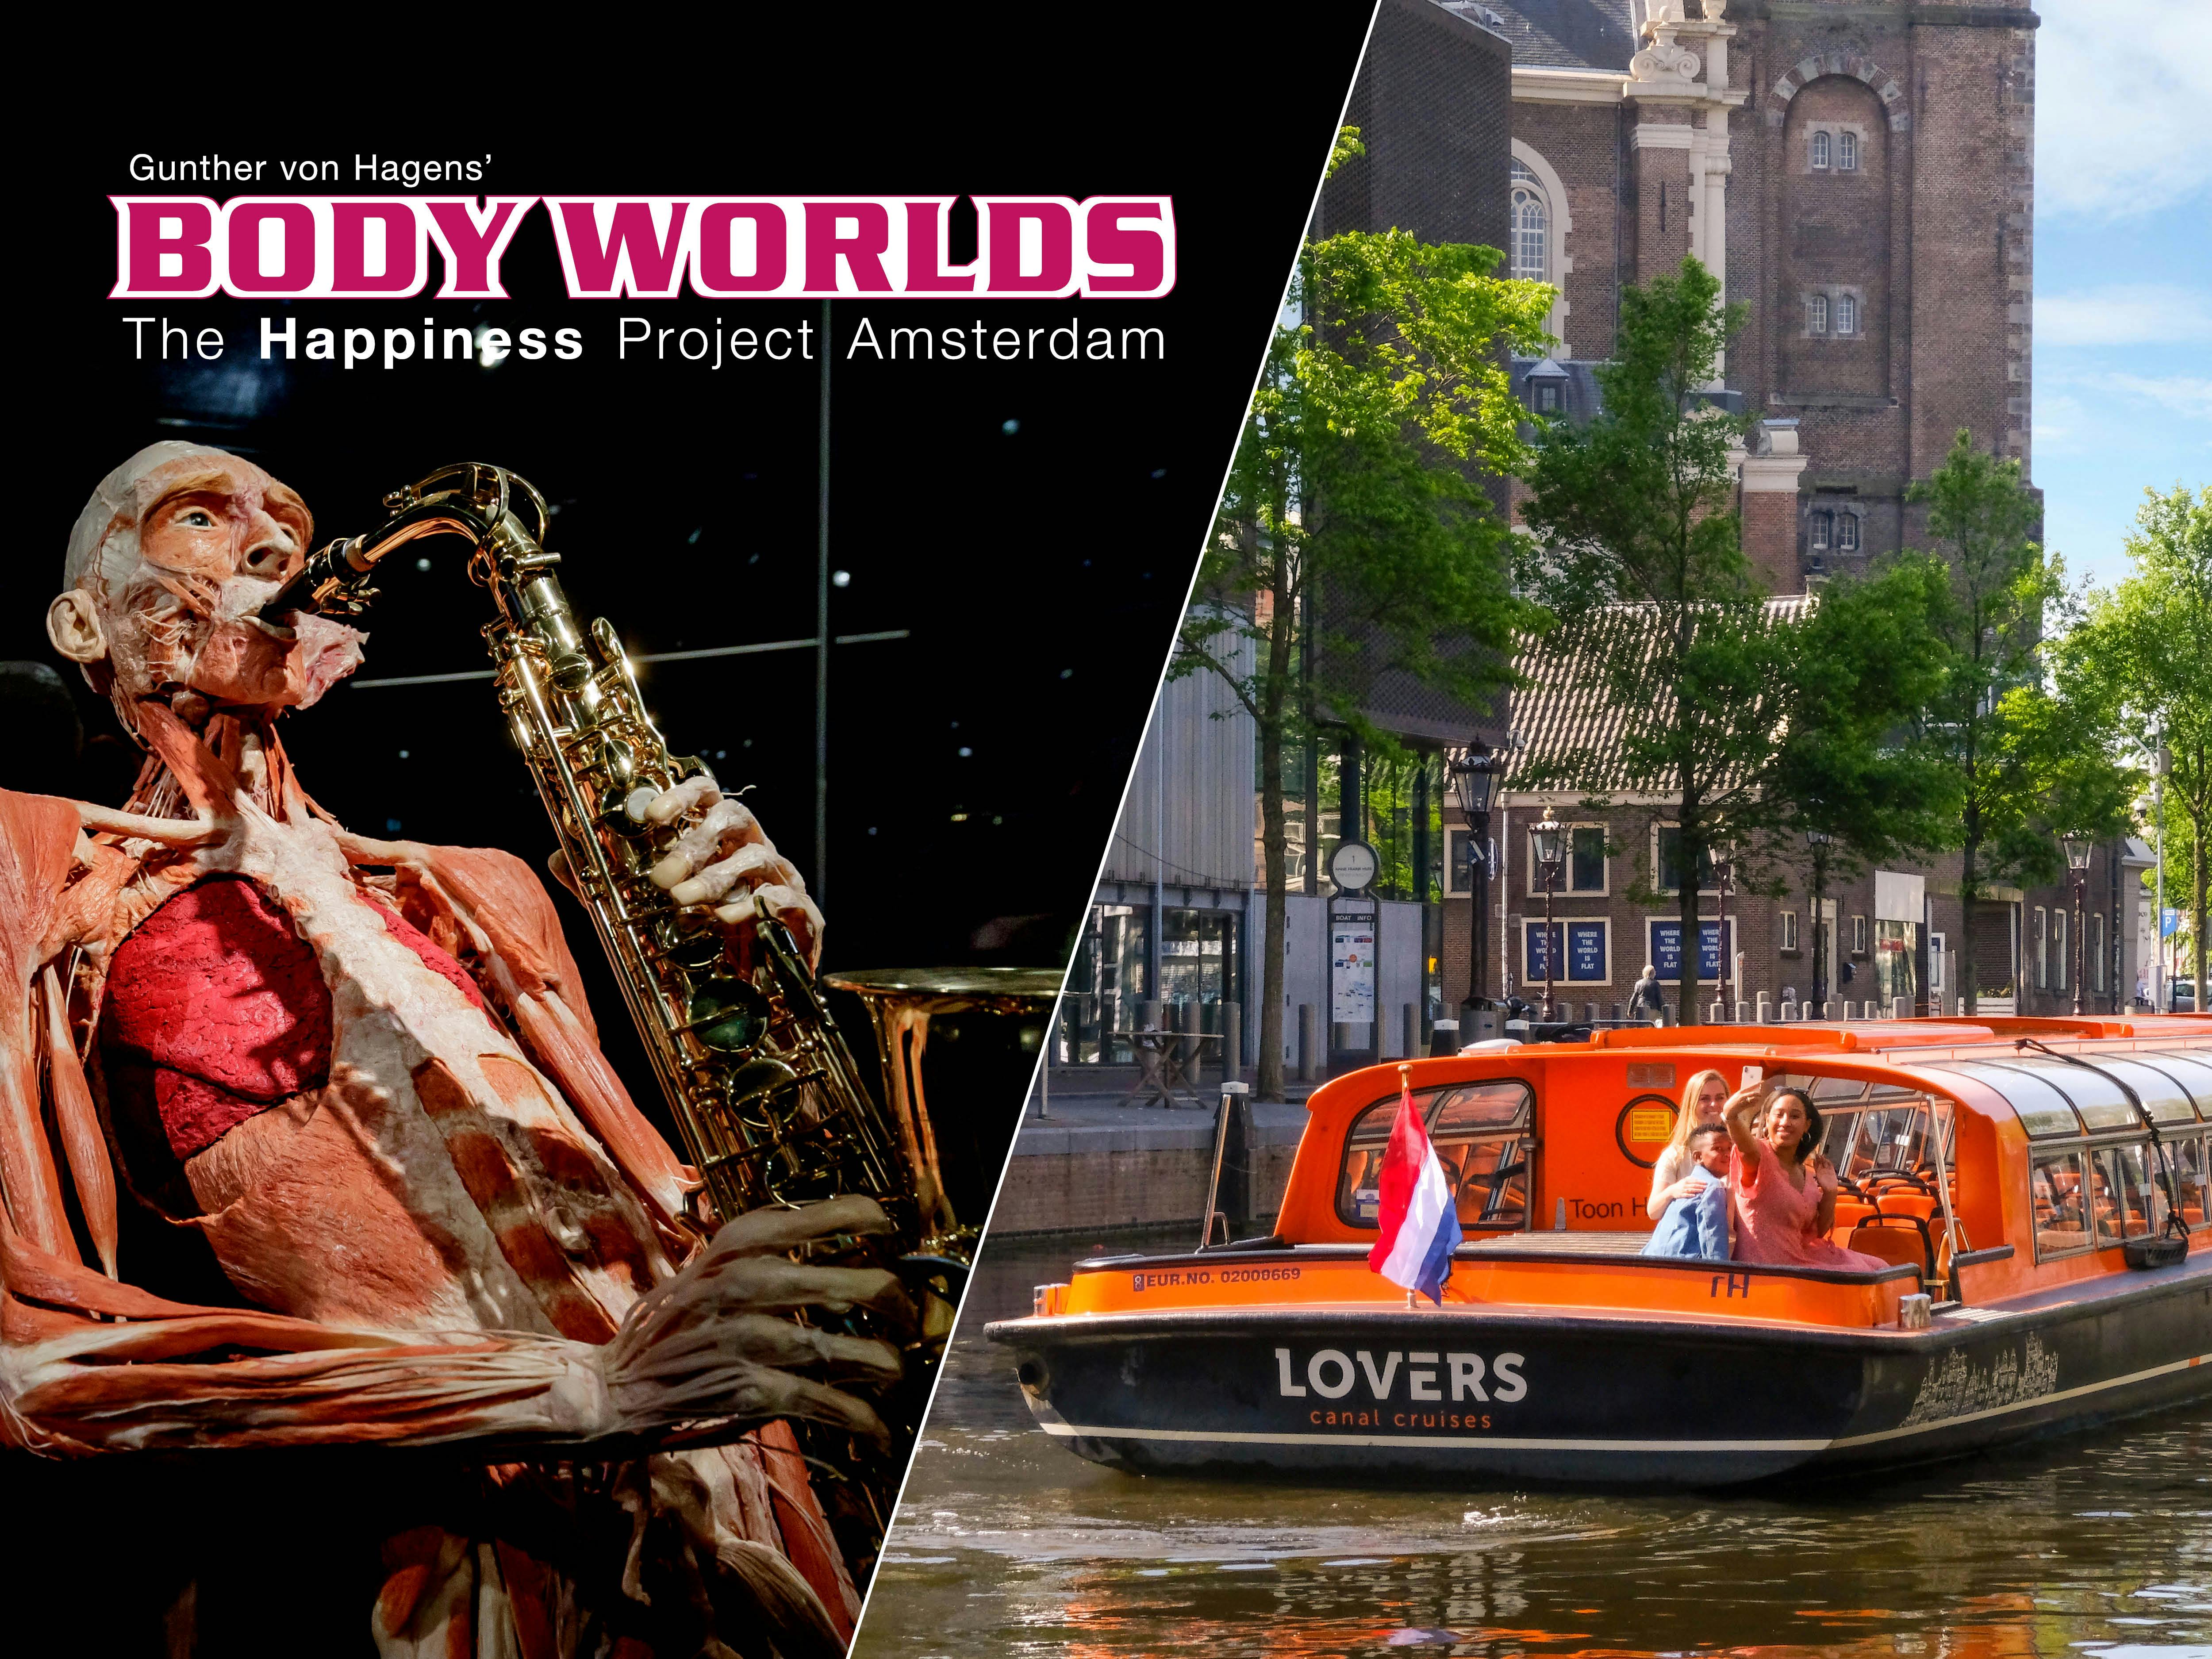 Amsterdam Body Worlds skip-the-line ticket and one-hour canal cruise